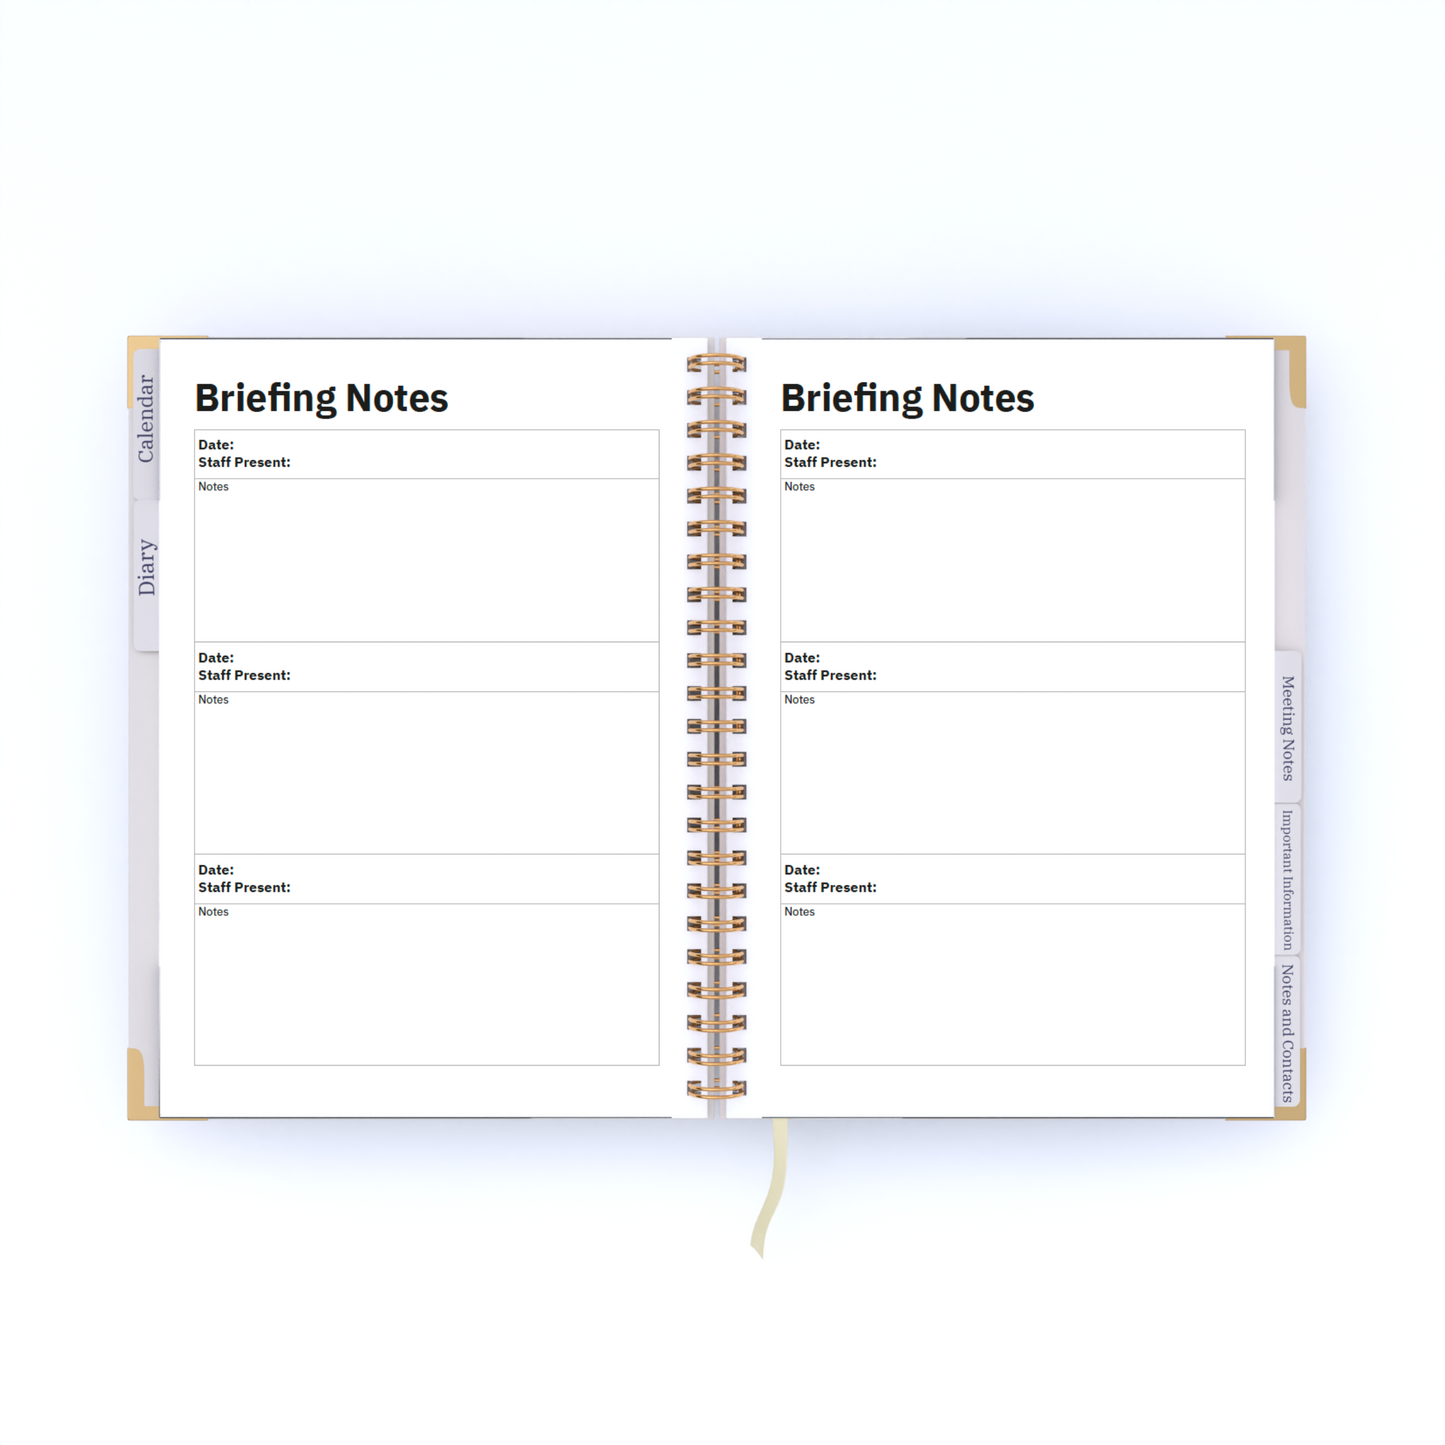 School Business Manager Hazy Days Planner 2024 - 2025